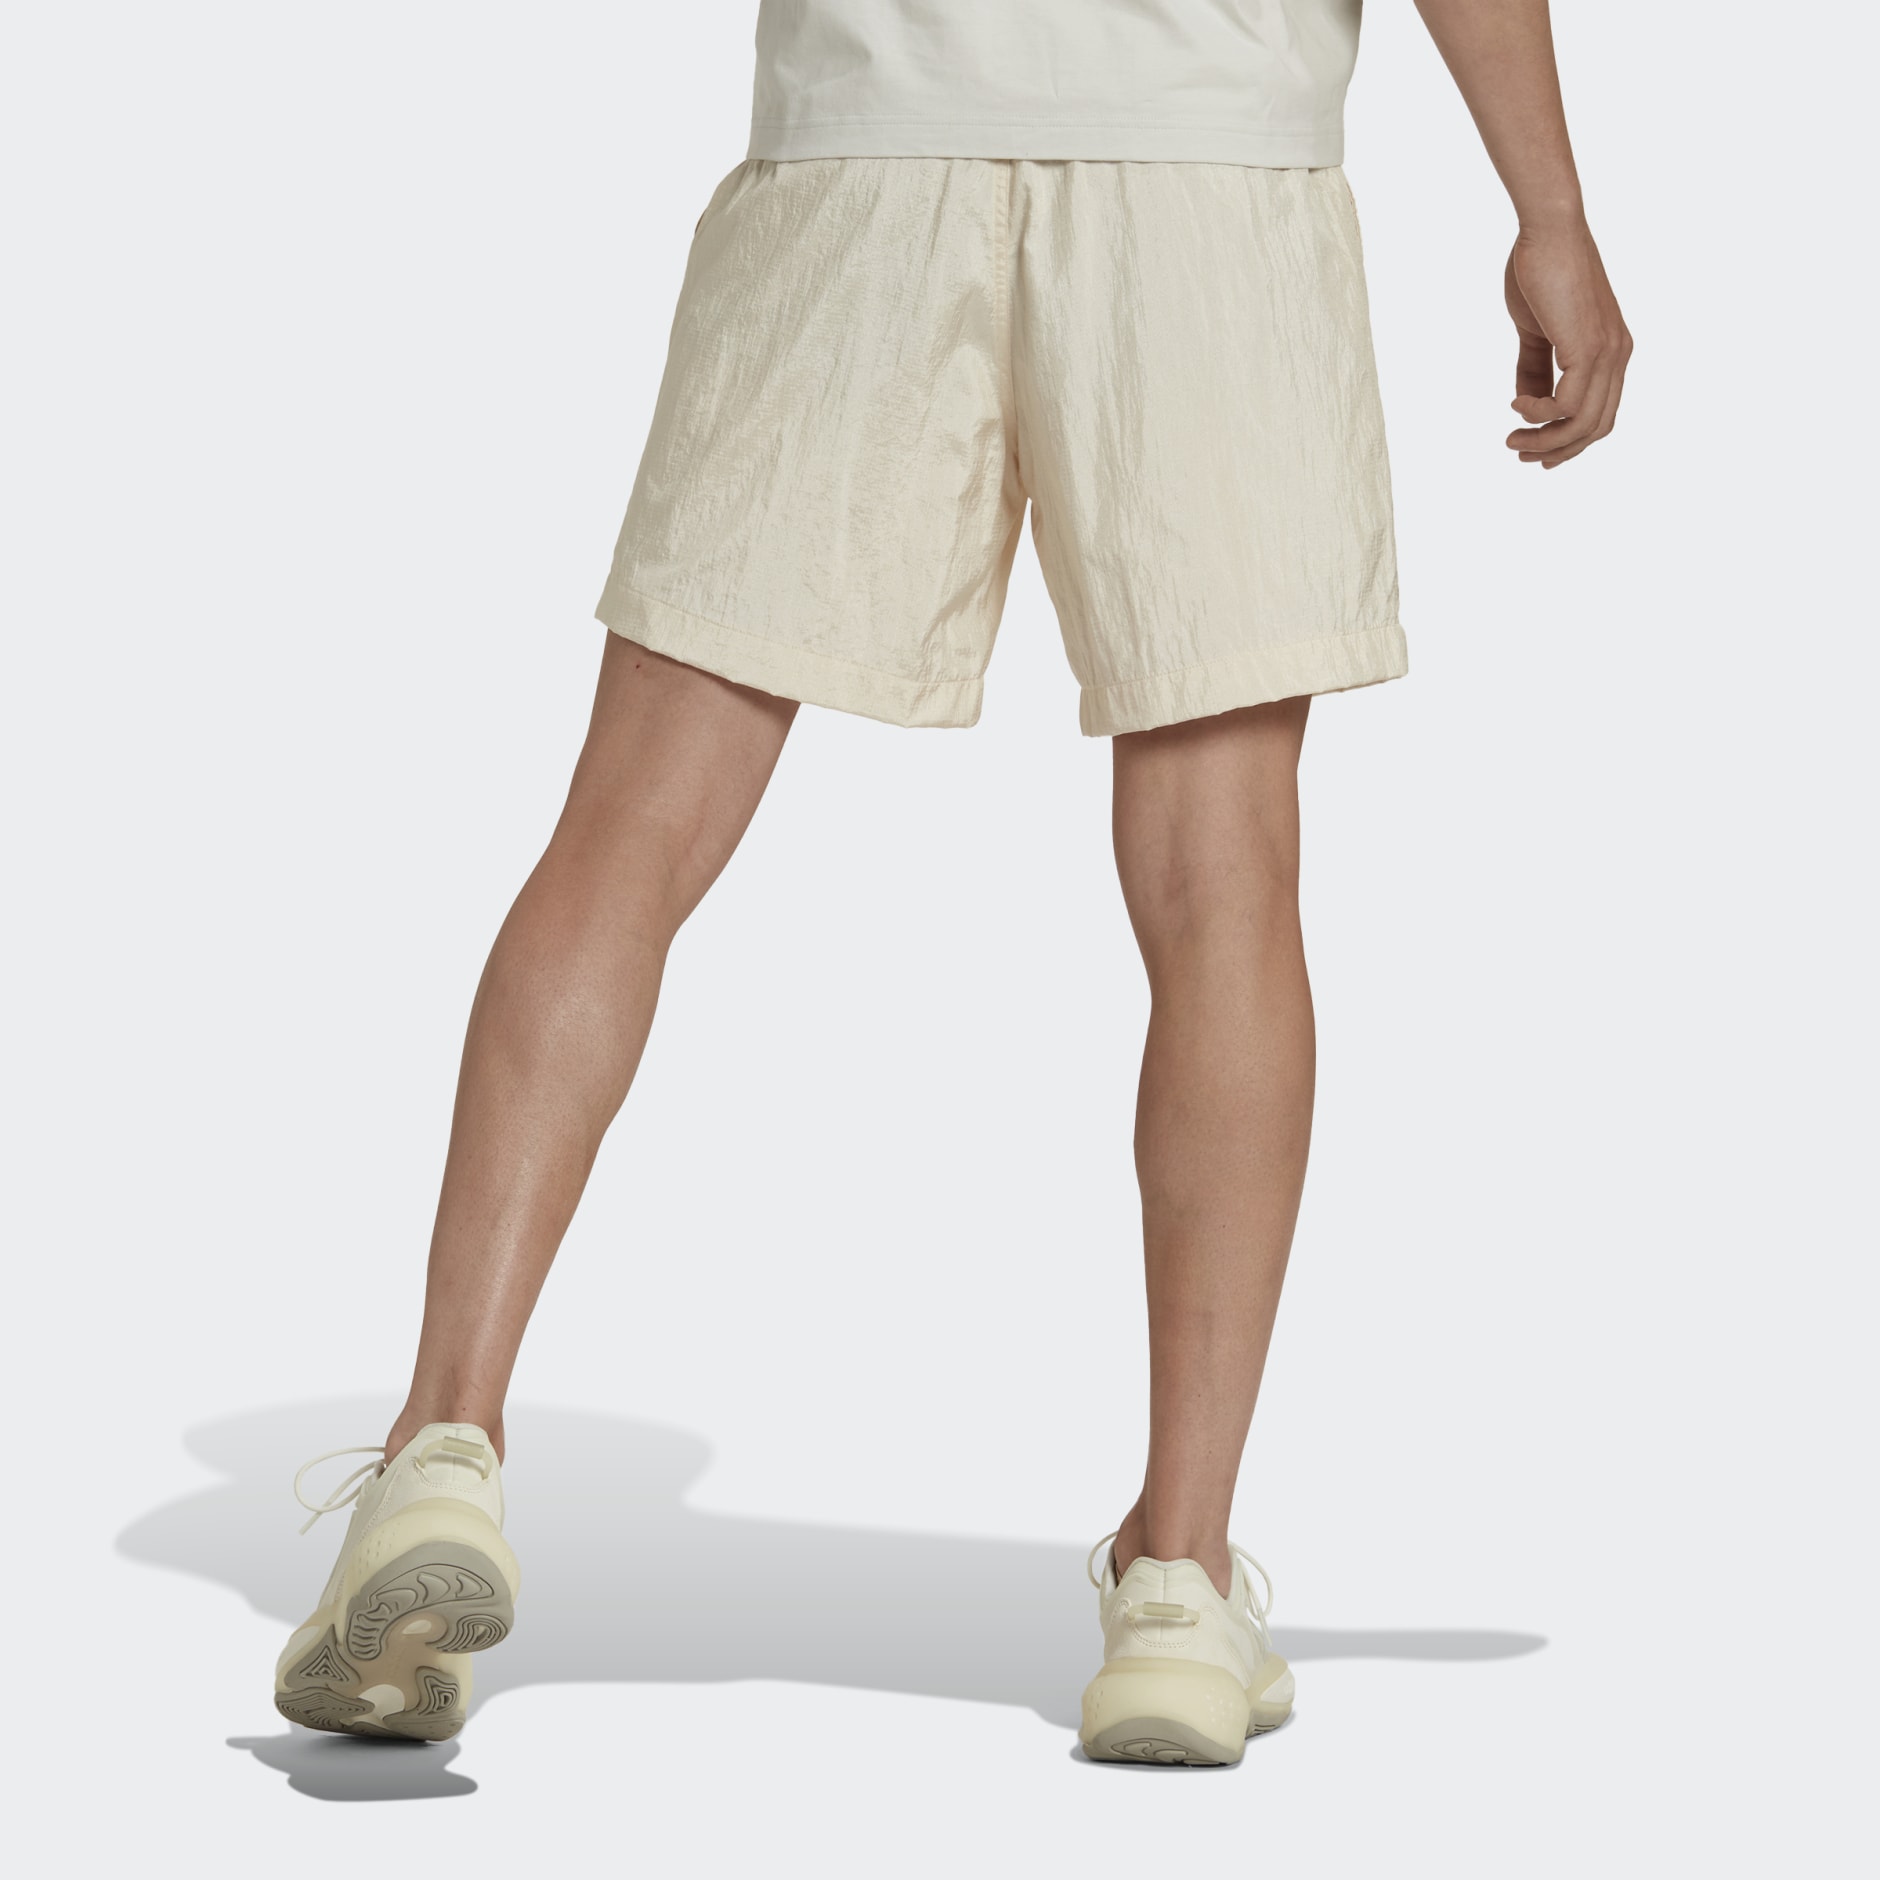 Clothing - Reveal Material Mix Shorts - Beige | adidas South Africa